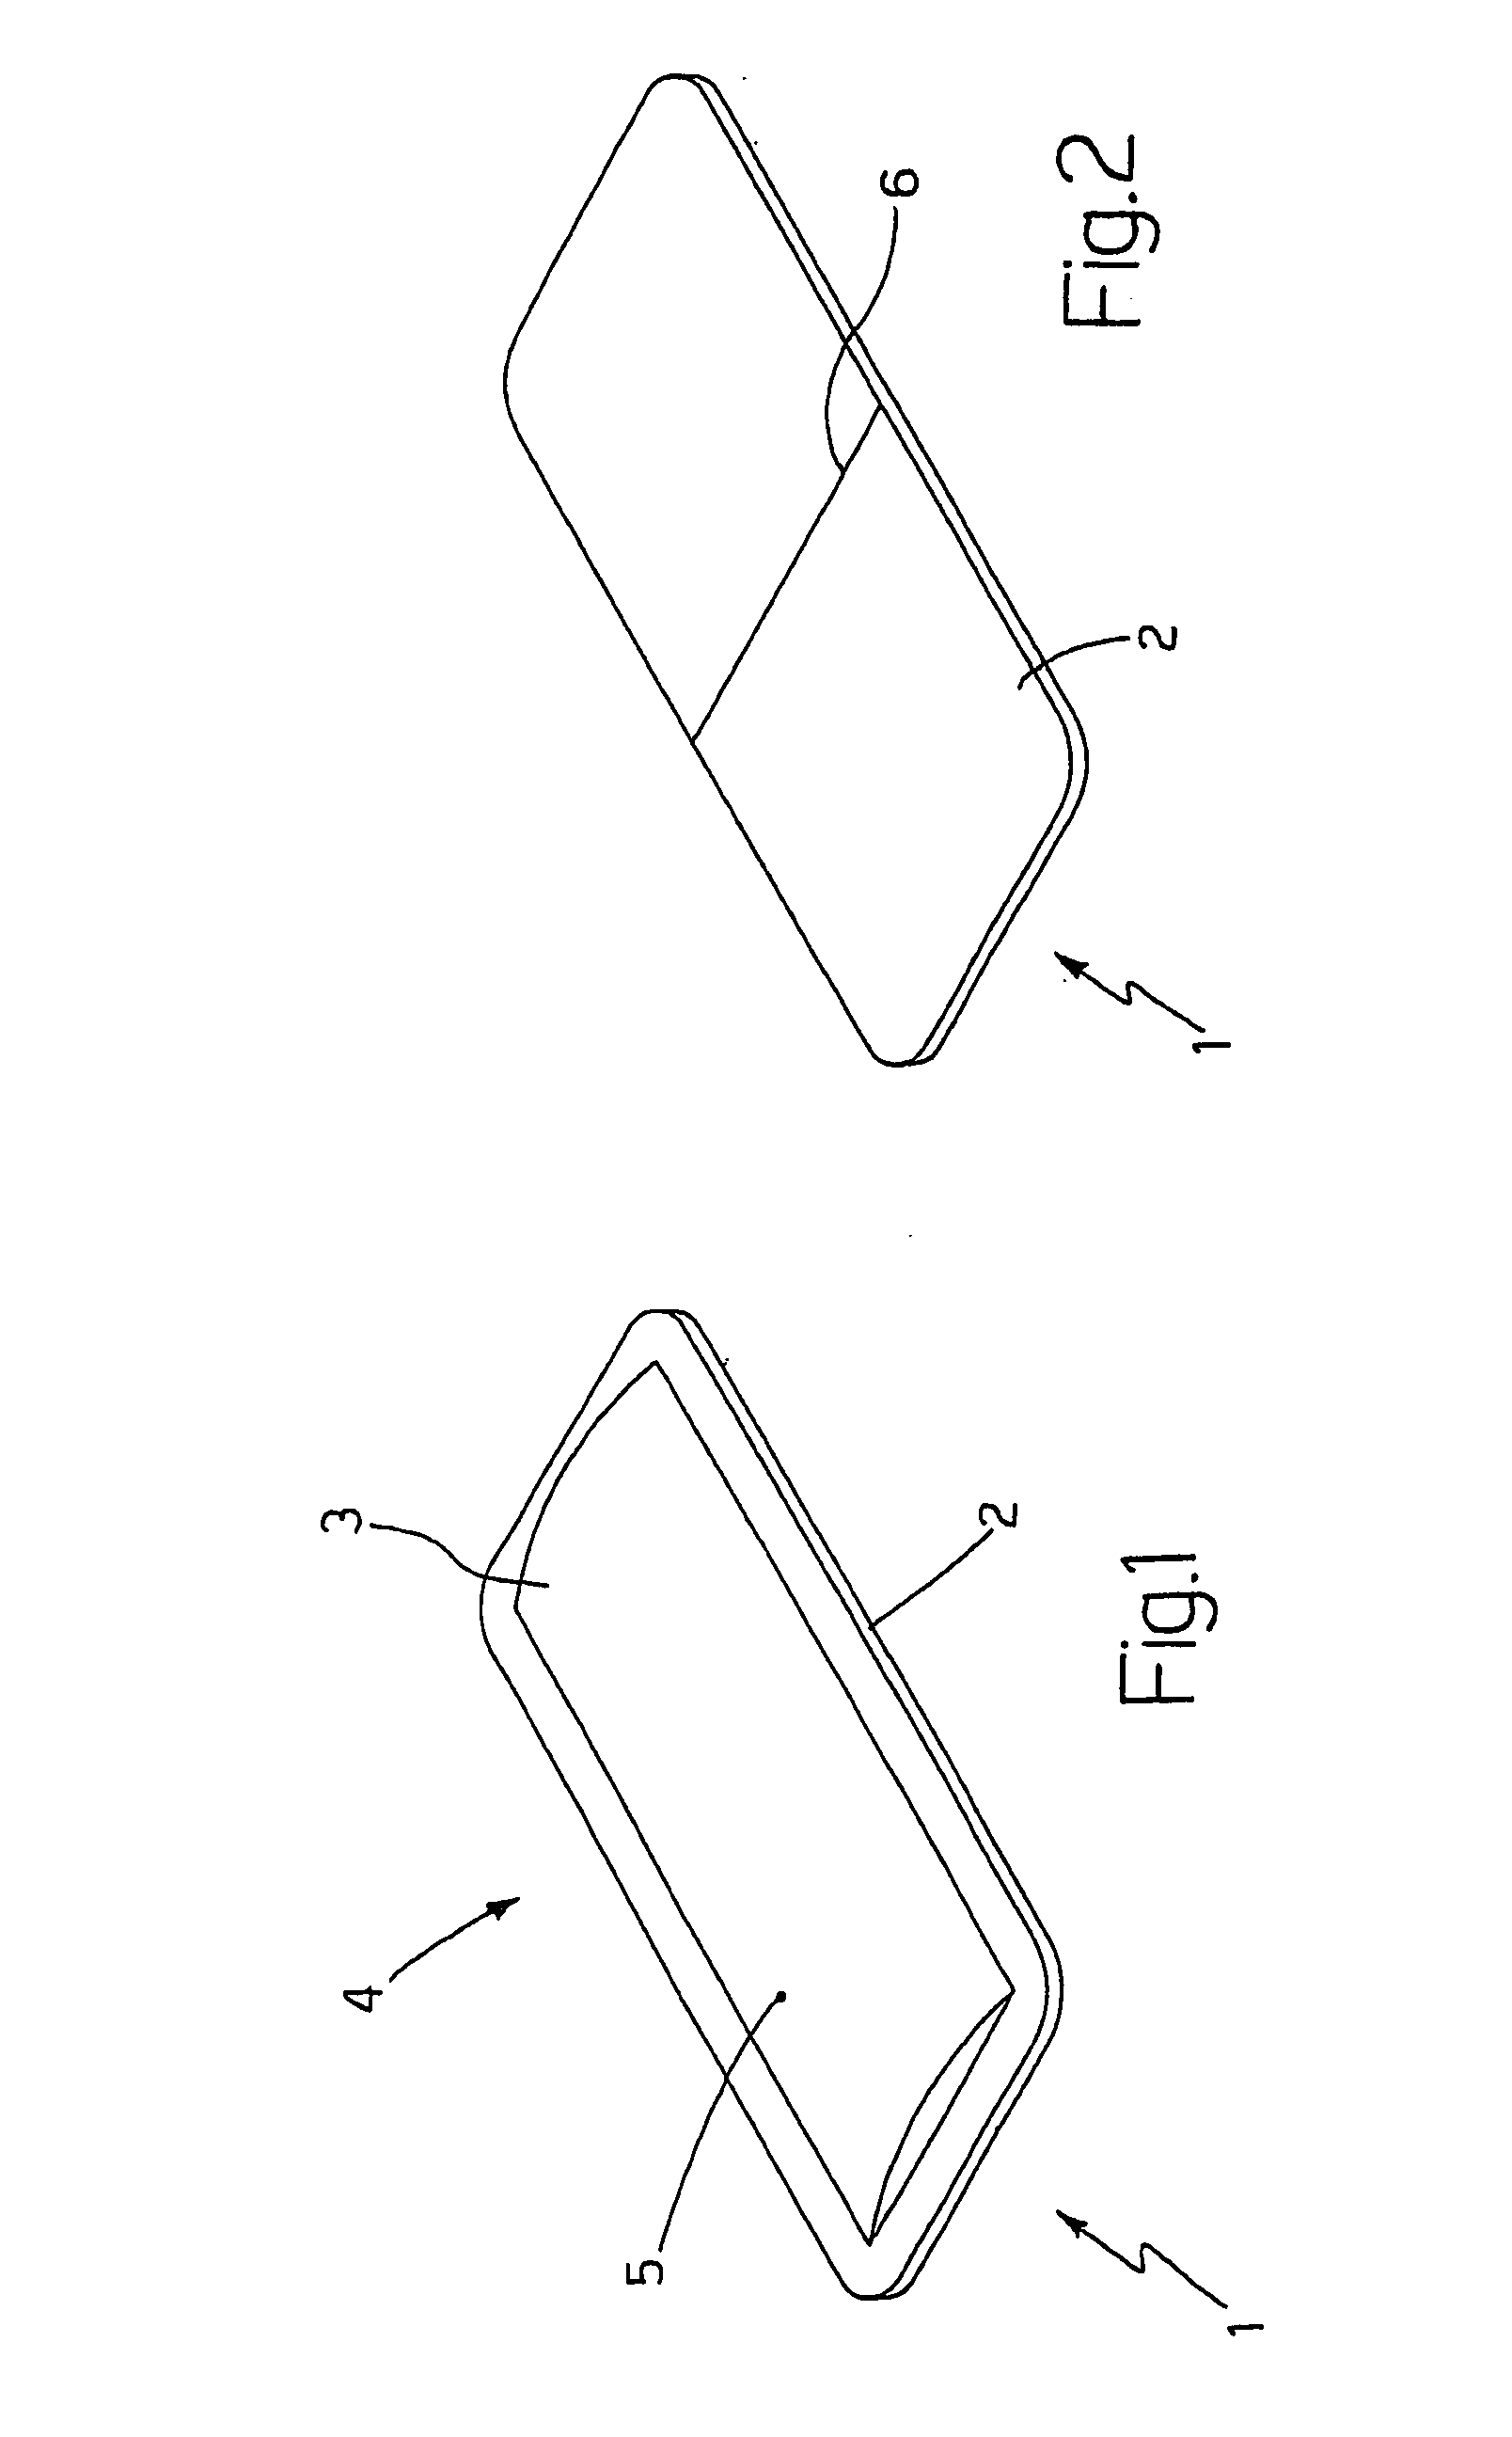 Sealed single-dose break-open package, and packing method and machine for producing a single-dose break-open package